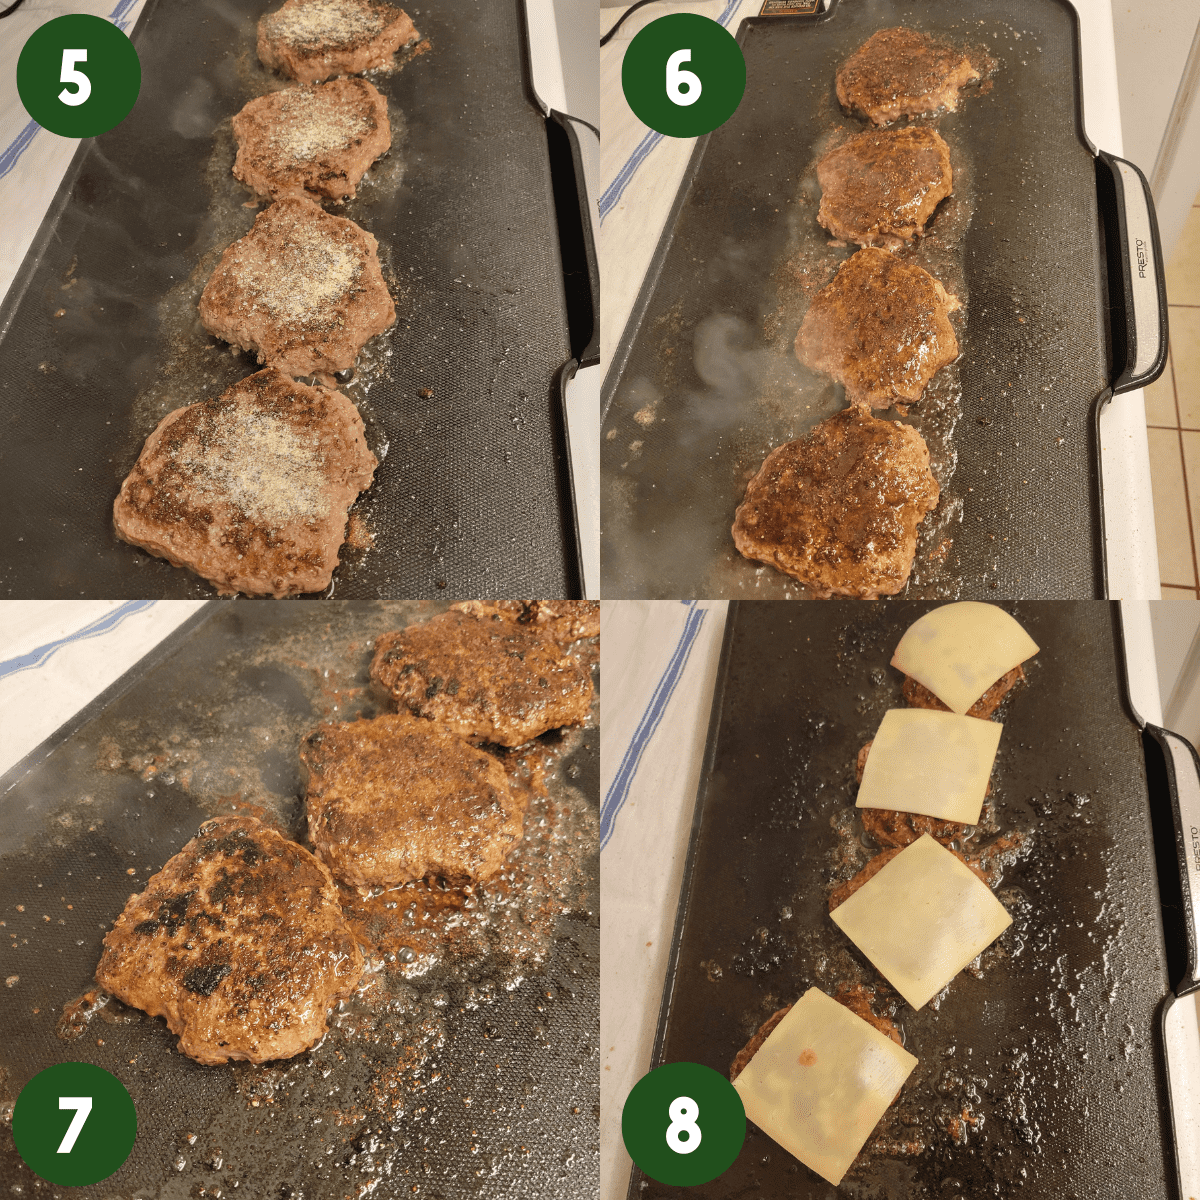 2 by 2 photo collage showing steps 5 through 8. Photo 5) Seasoned burgers on the griddle. Photo 6) Browned burgers on the electric griddle. Photo 7) Close up of browned burgers being almost done on the electric griddle. Photo 8) Cheese being melted on cooked burgers on electric griddle.